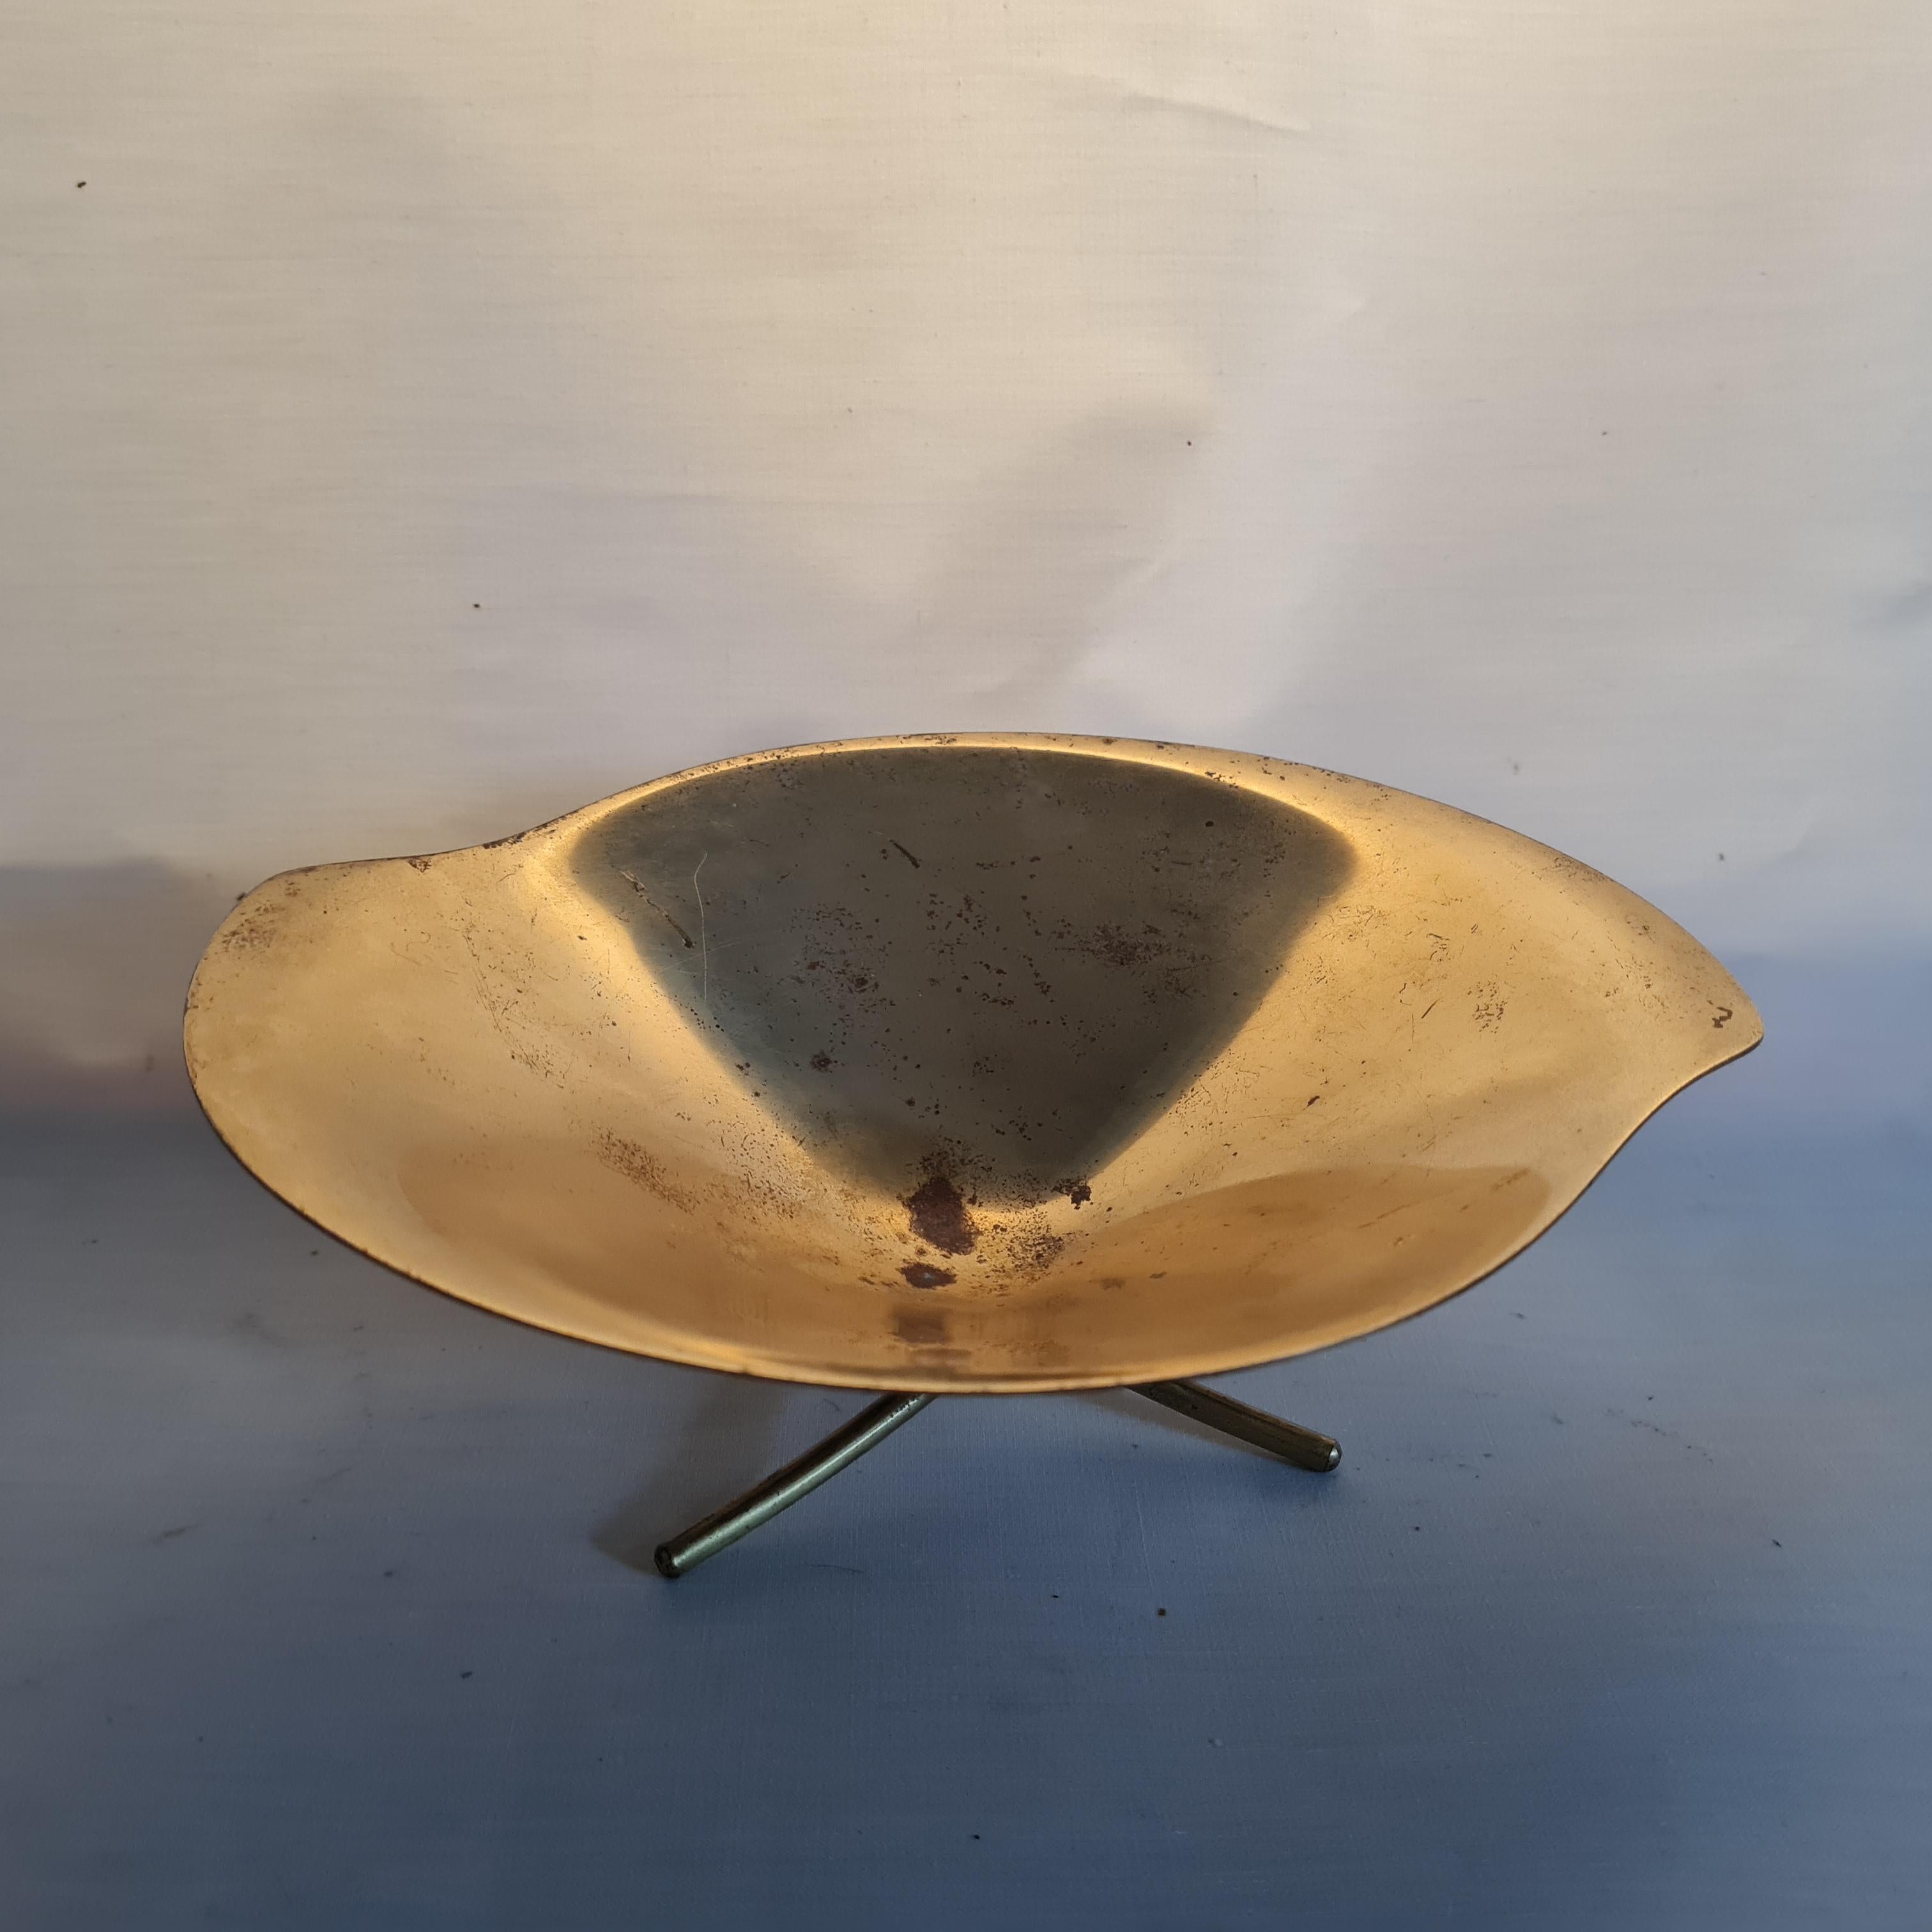 Nice  tripod brass cup by Gunter Kupetz. Germany 50's. Table centerpiece, tureen, fruit bowl, this elegant piece with a golden shine can be used for many things. Height: 10 cm - Width: 21 cm - Depth: 18 cm. Very good condition with some traces of